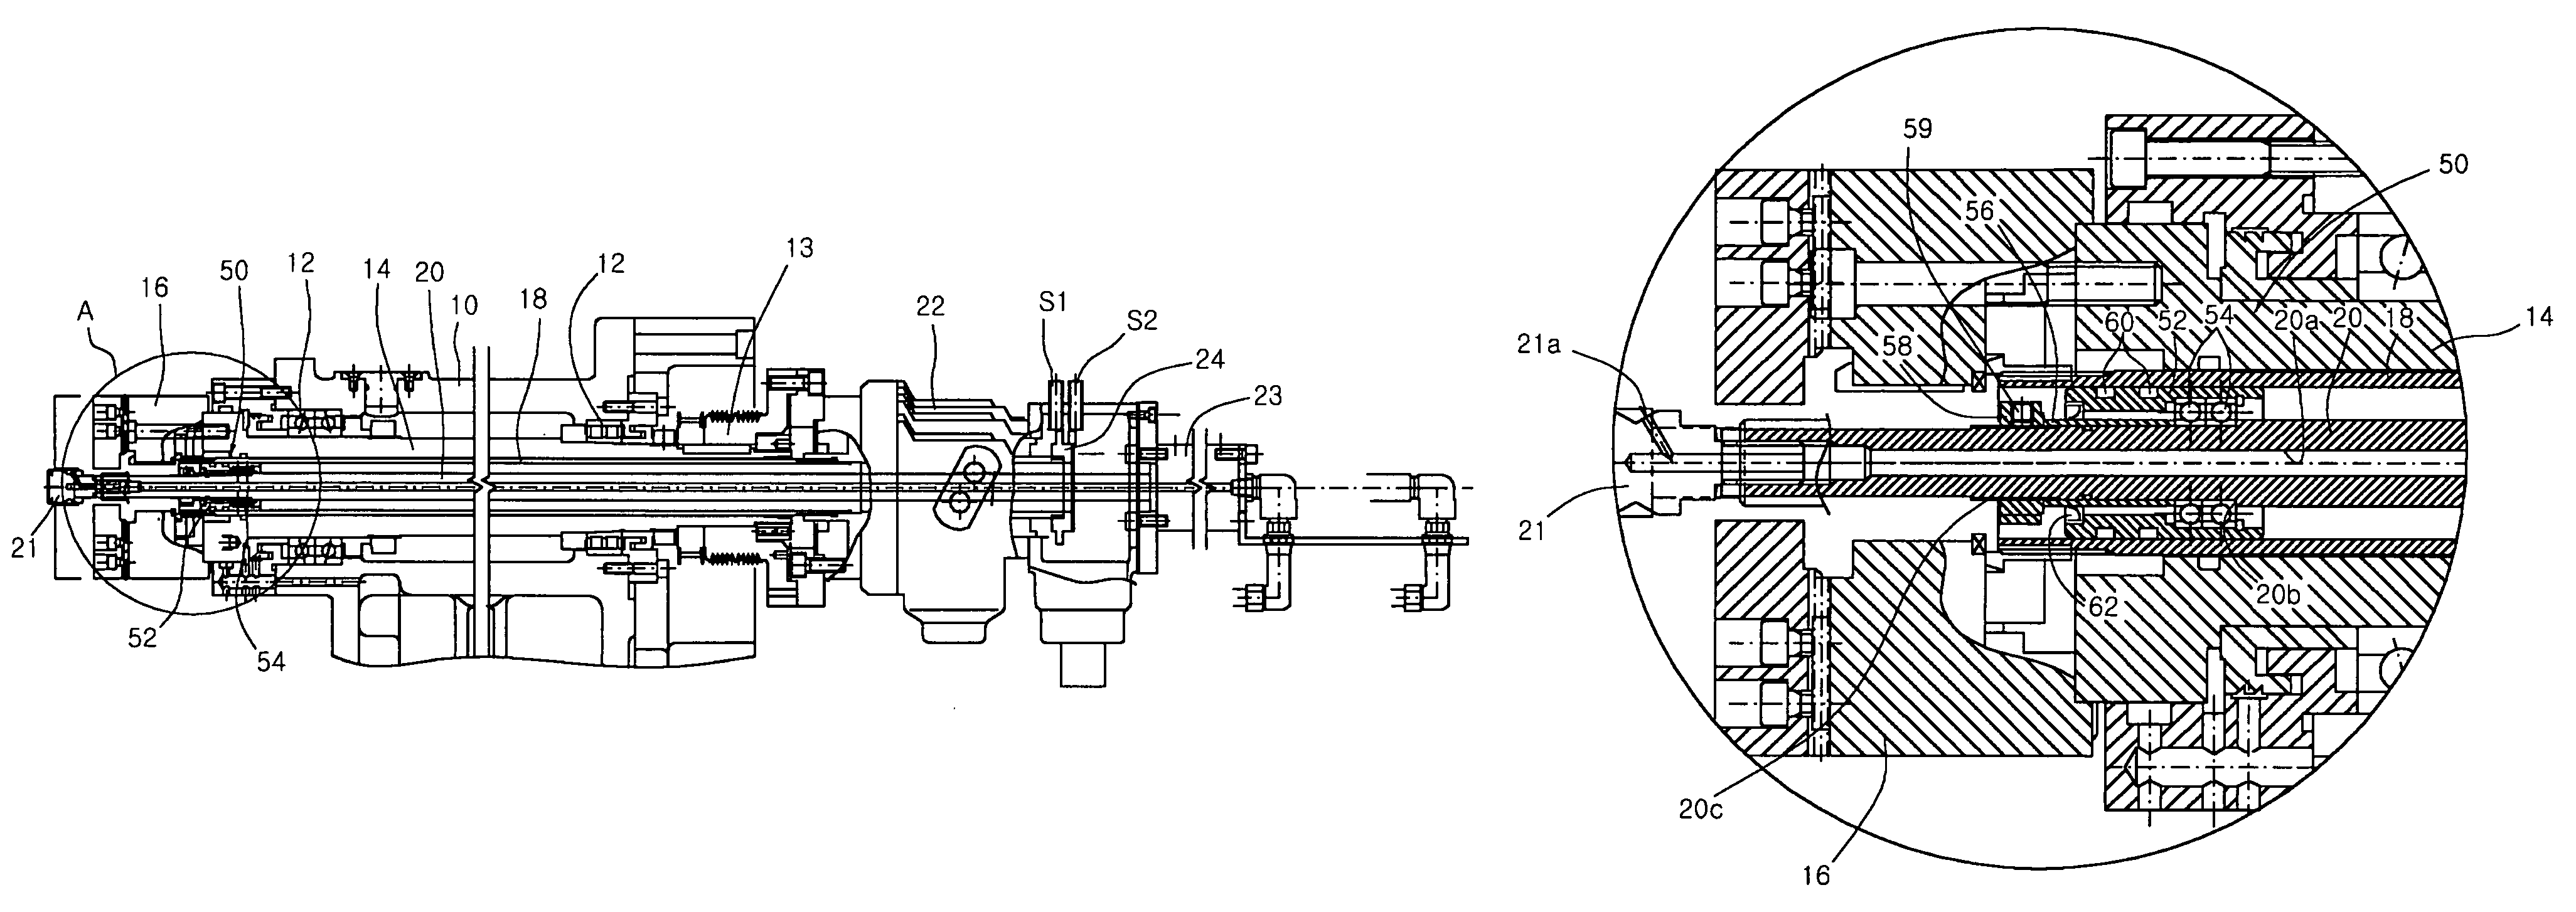 Workpiece ejecting device for a machine tool